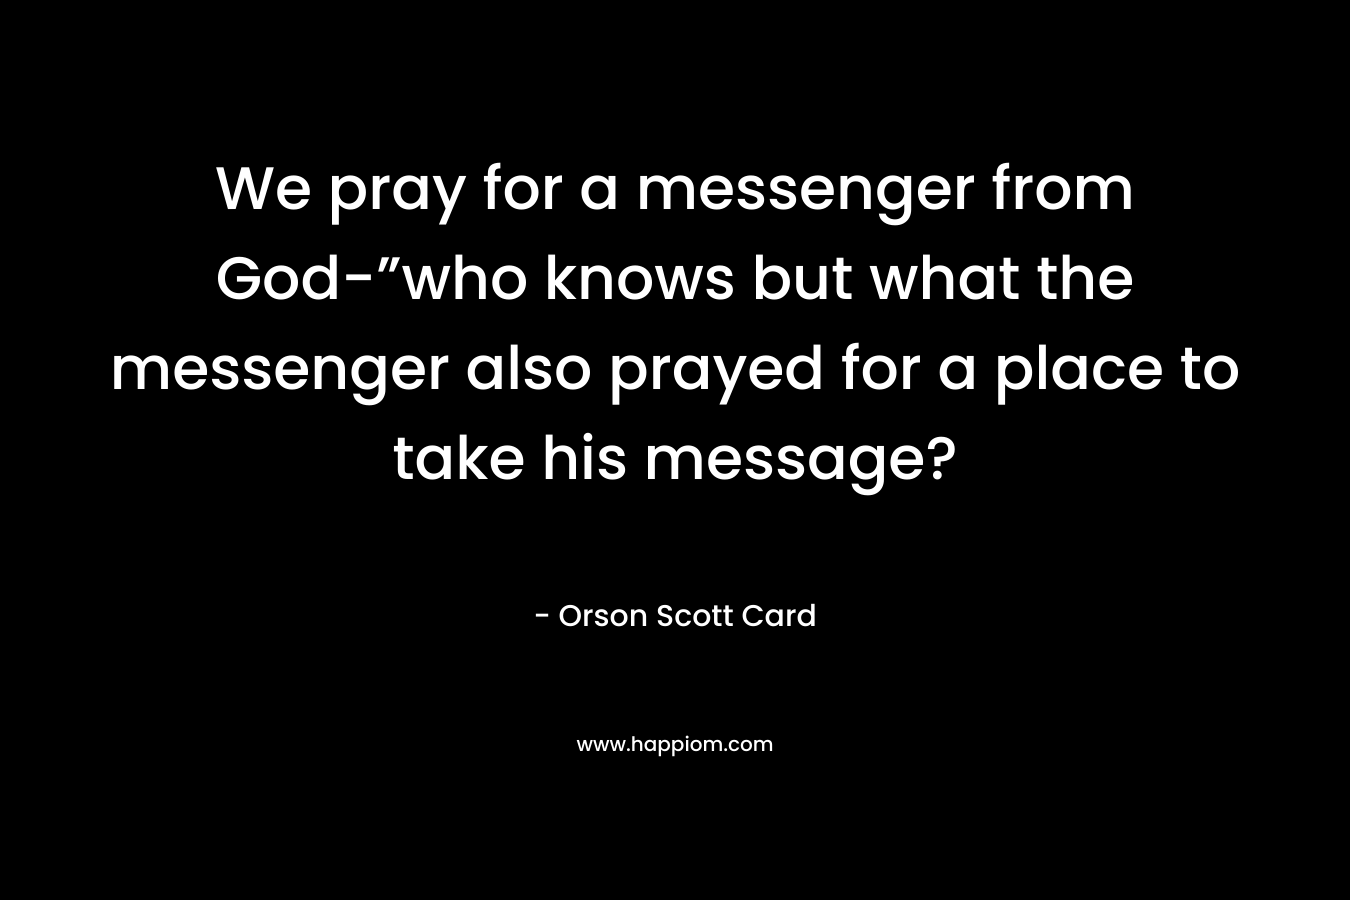 We pray for a messenger from God-”who knows but what the messenger also prayed for a place to take his message? – Orson Scott Card